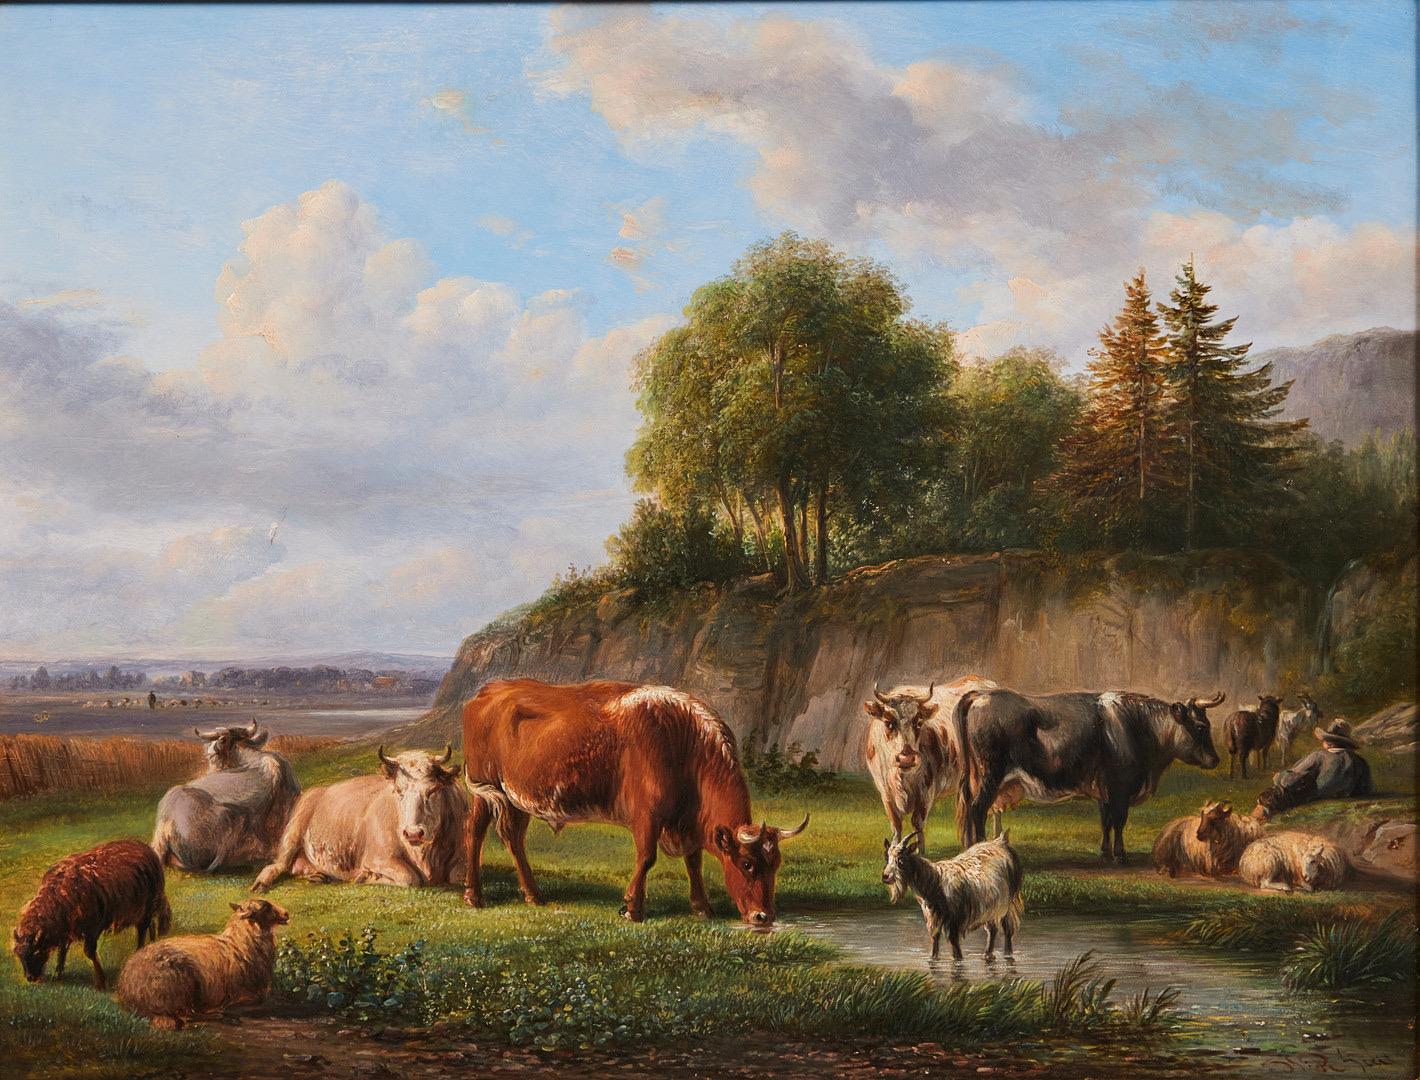 19th century dutch romantic painting - Cows, sheep and goats in their field  - Old Masters Painting by Ravenswaay, Jan van